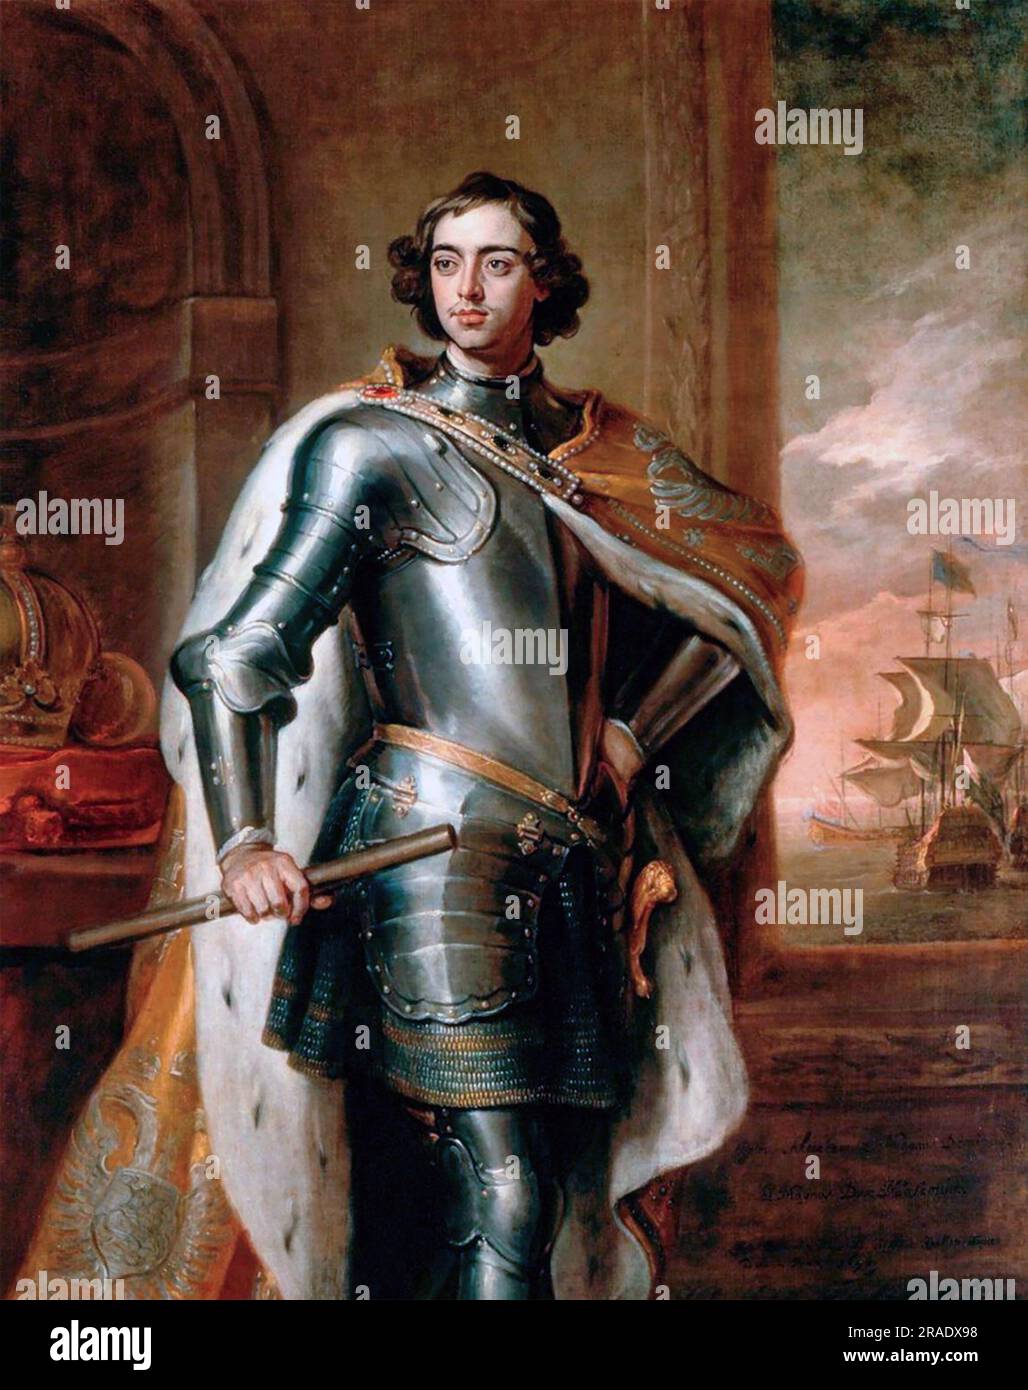 PETER THE GREAT (1672-1725) Emperor of Russia, by Godfrey Kneller, 1698. Peter gifted this portrait to Willioam III King of England Stock Photo